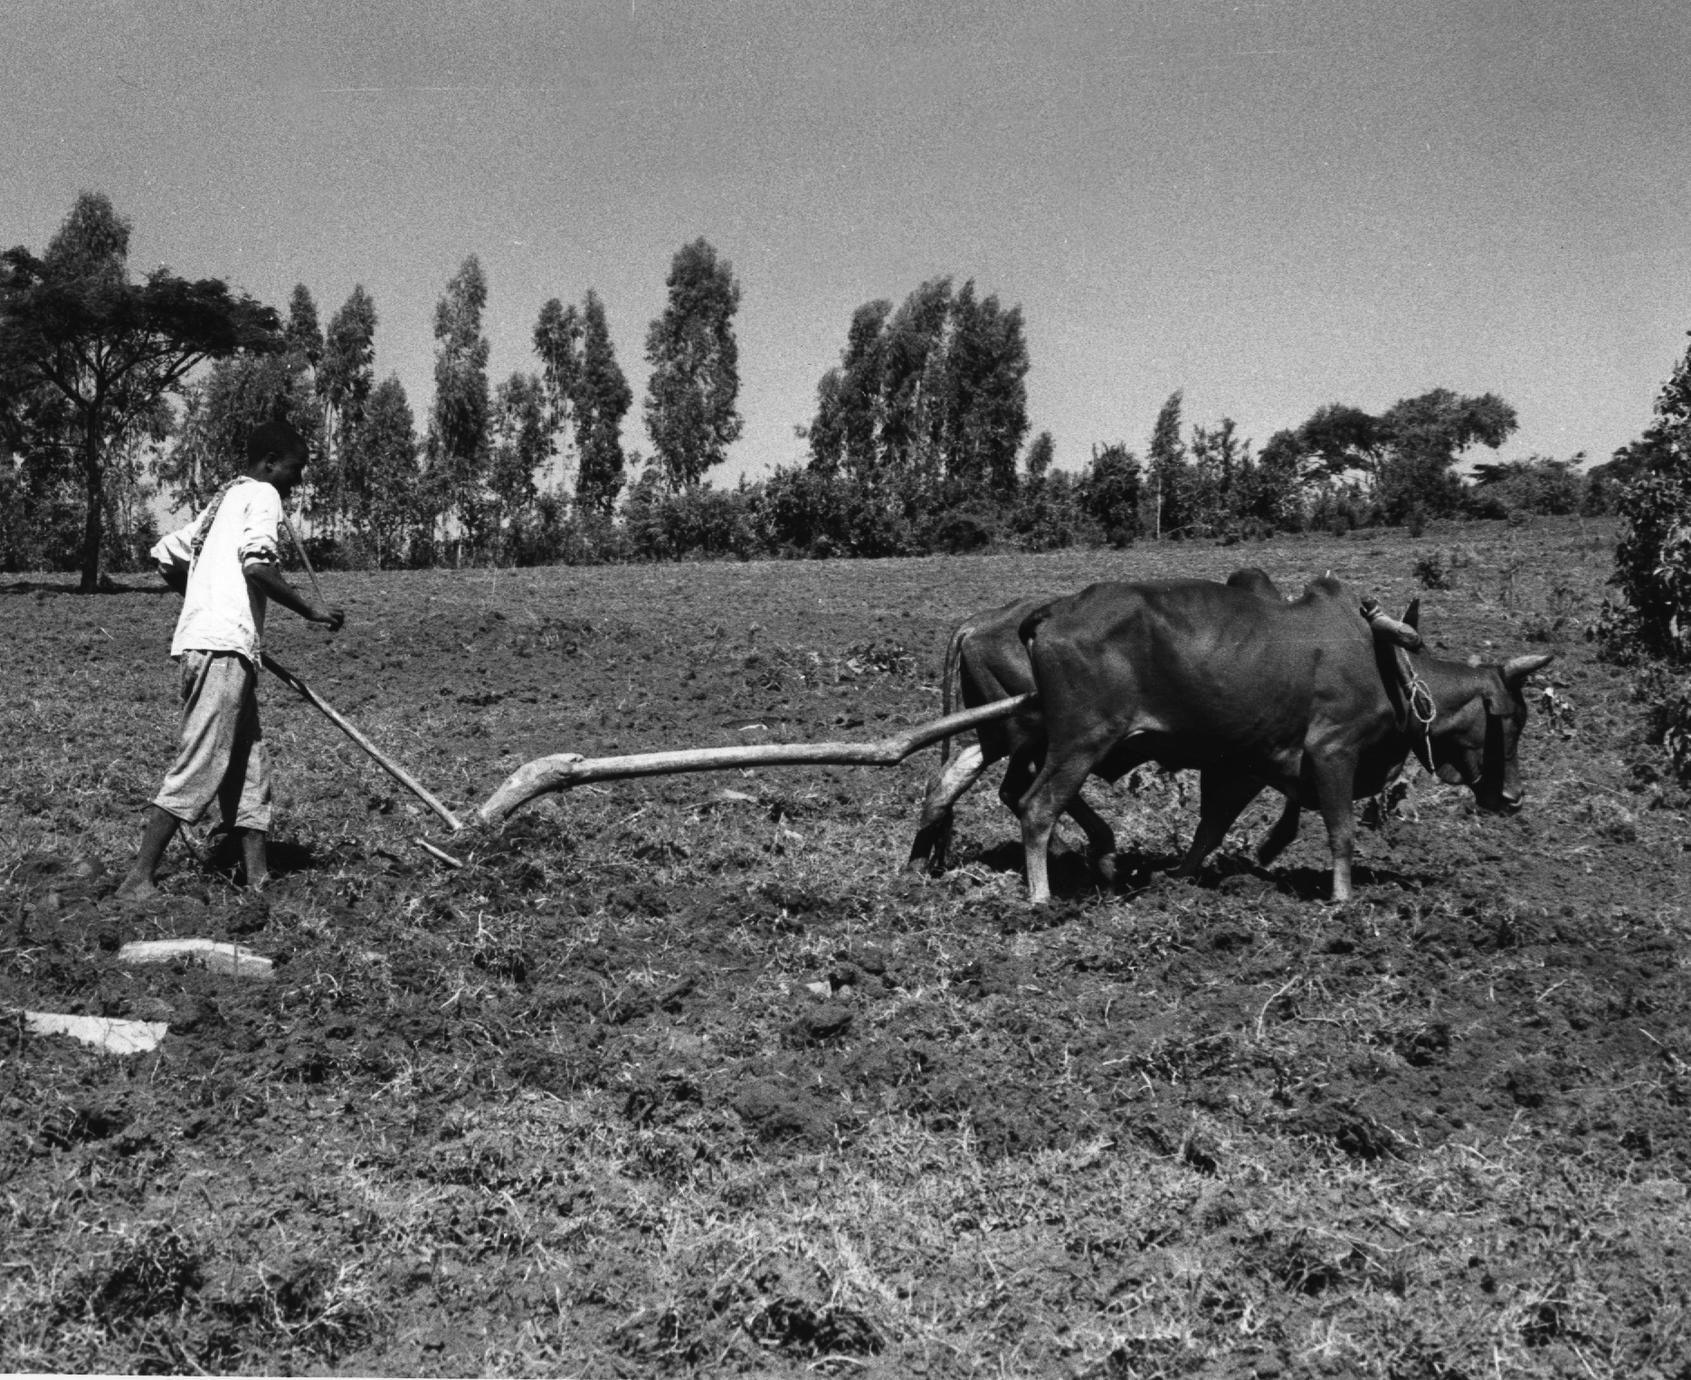 Plowing Field with Oxen